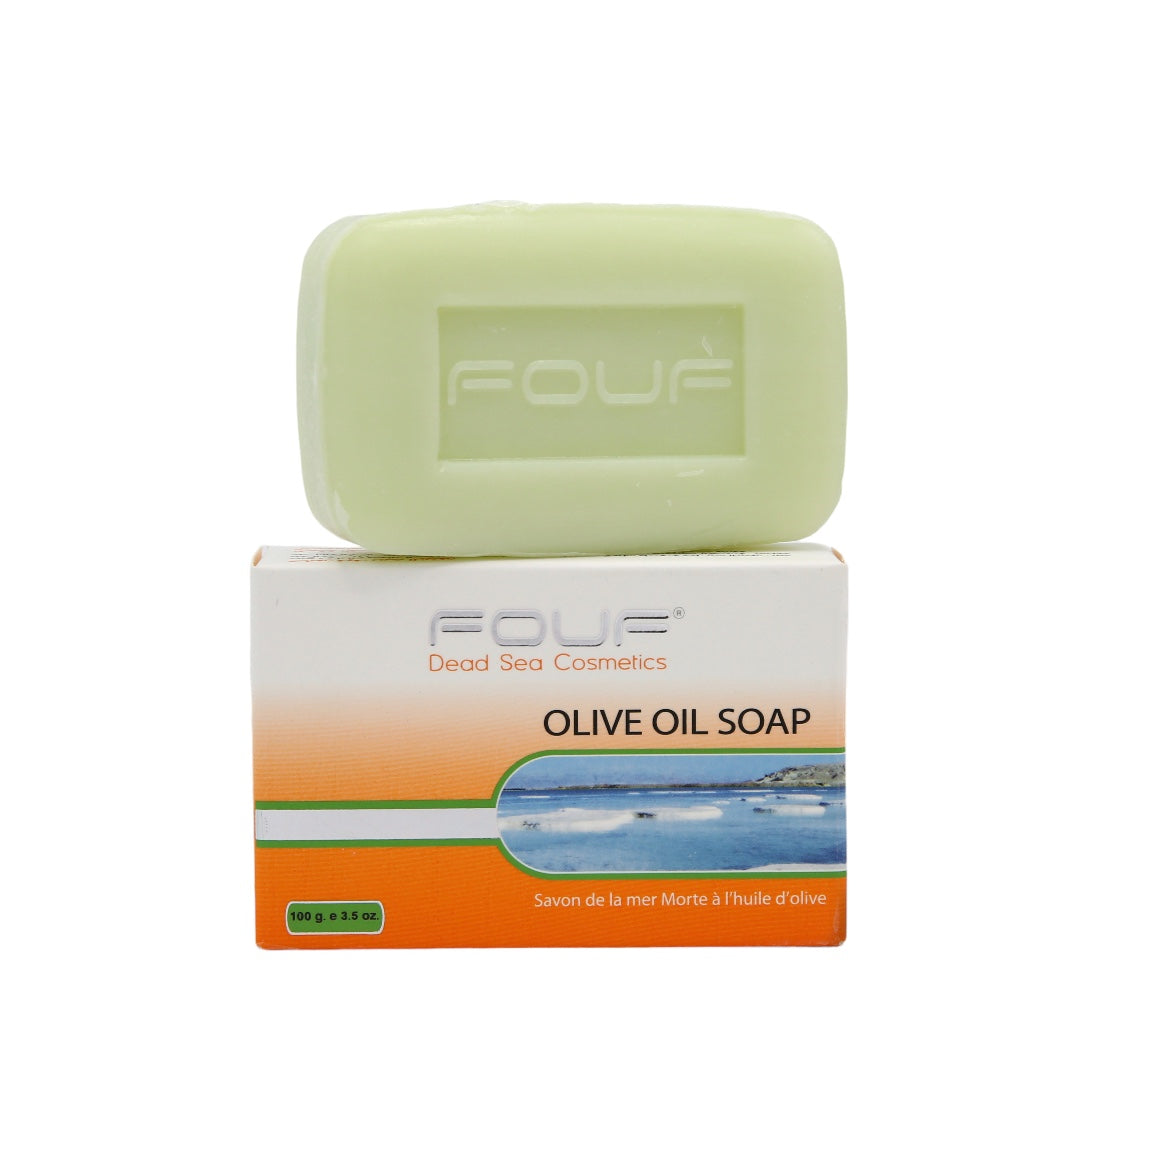 Fouf Olive Oil Soap, 100g